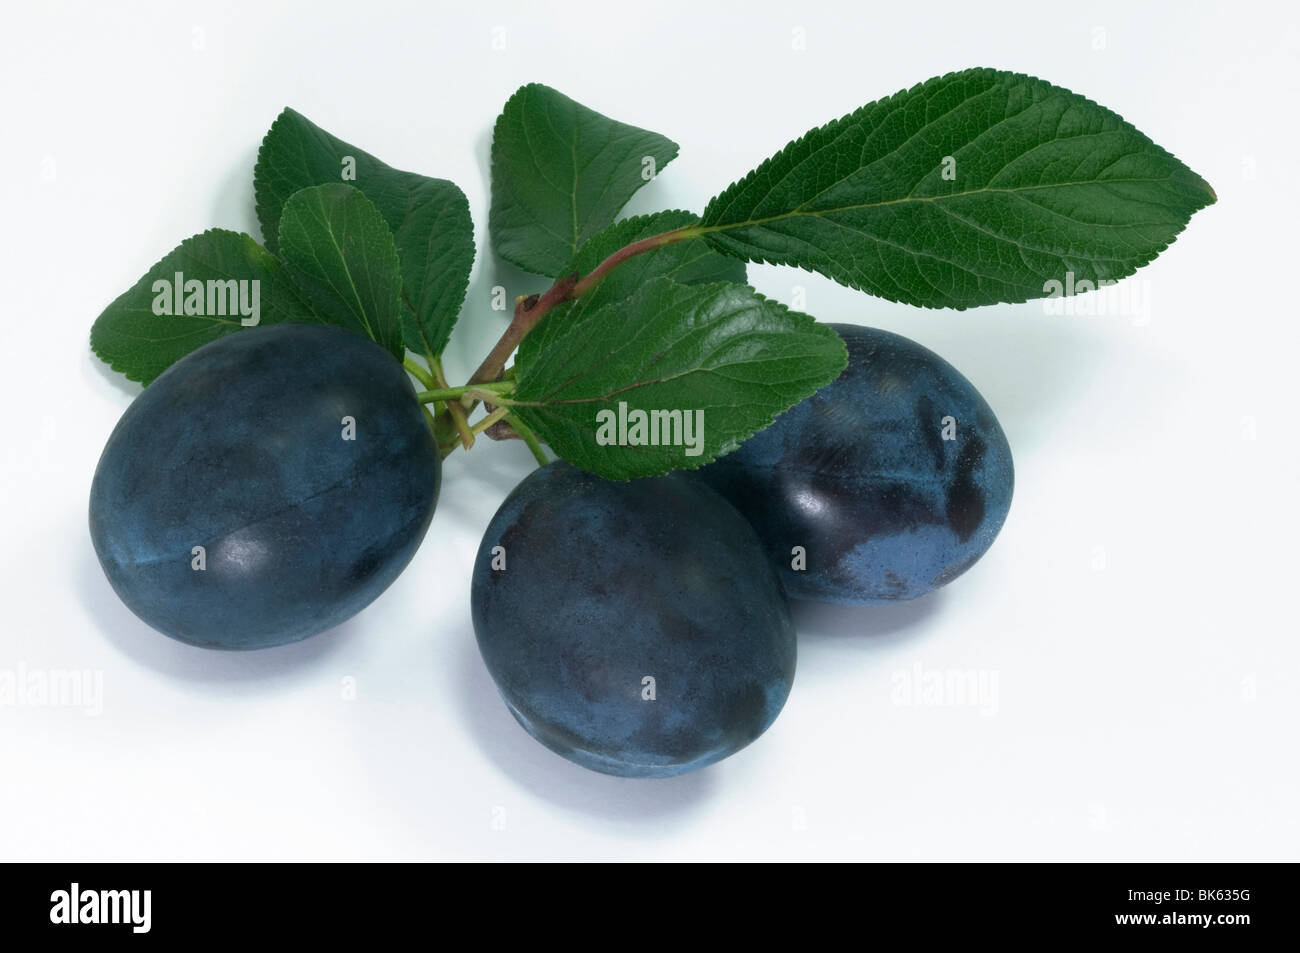 Damask Plum Damson Plum (Prunus domesticus), twig with fruit and leaves, studio picture. Stock Photo